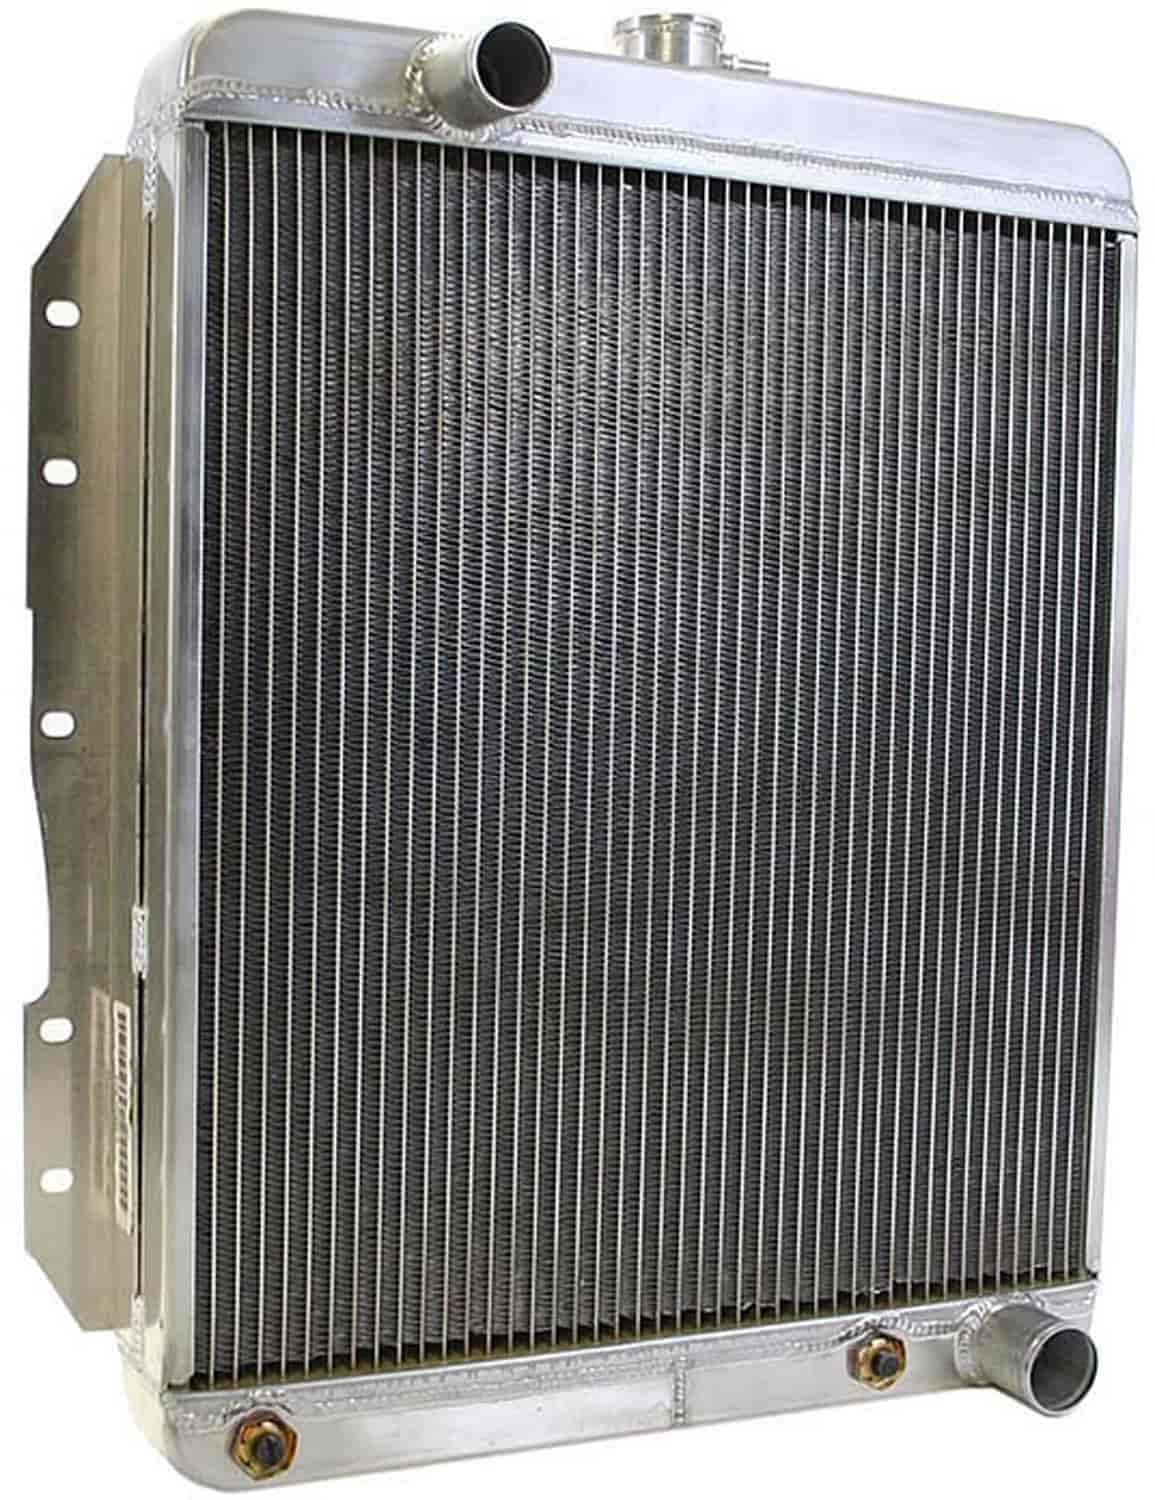 ExactFit Radiator for 1958 Chevrolet Car with Transmission Cooler